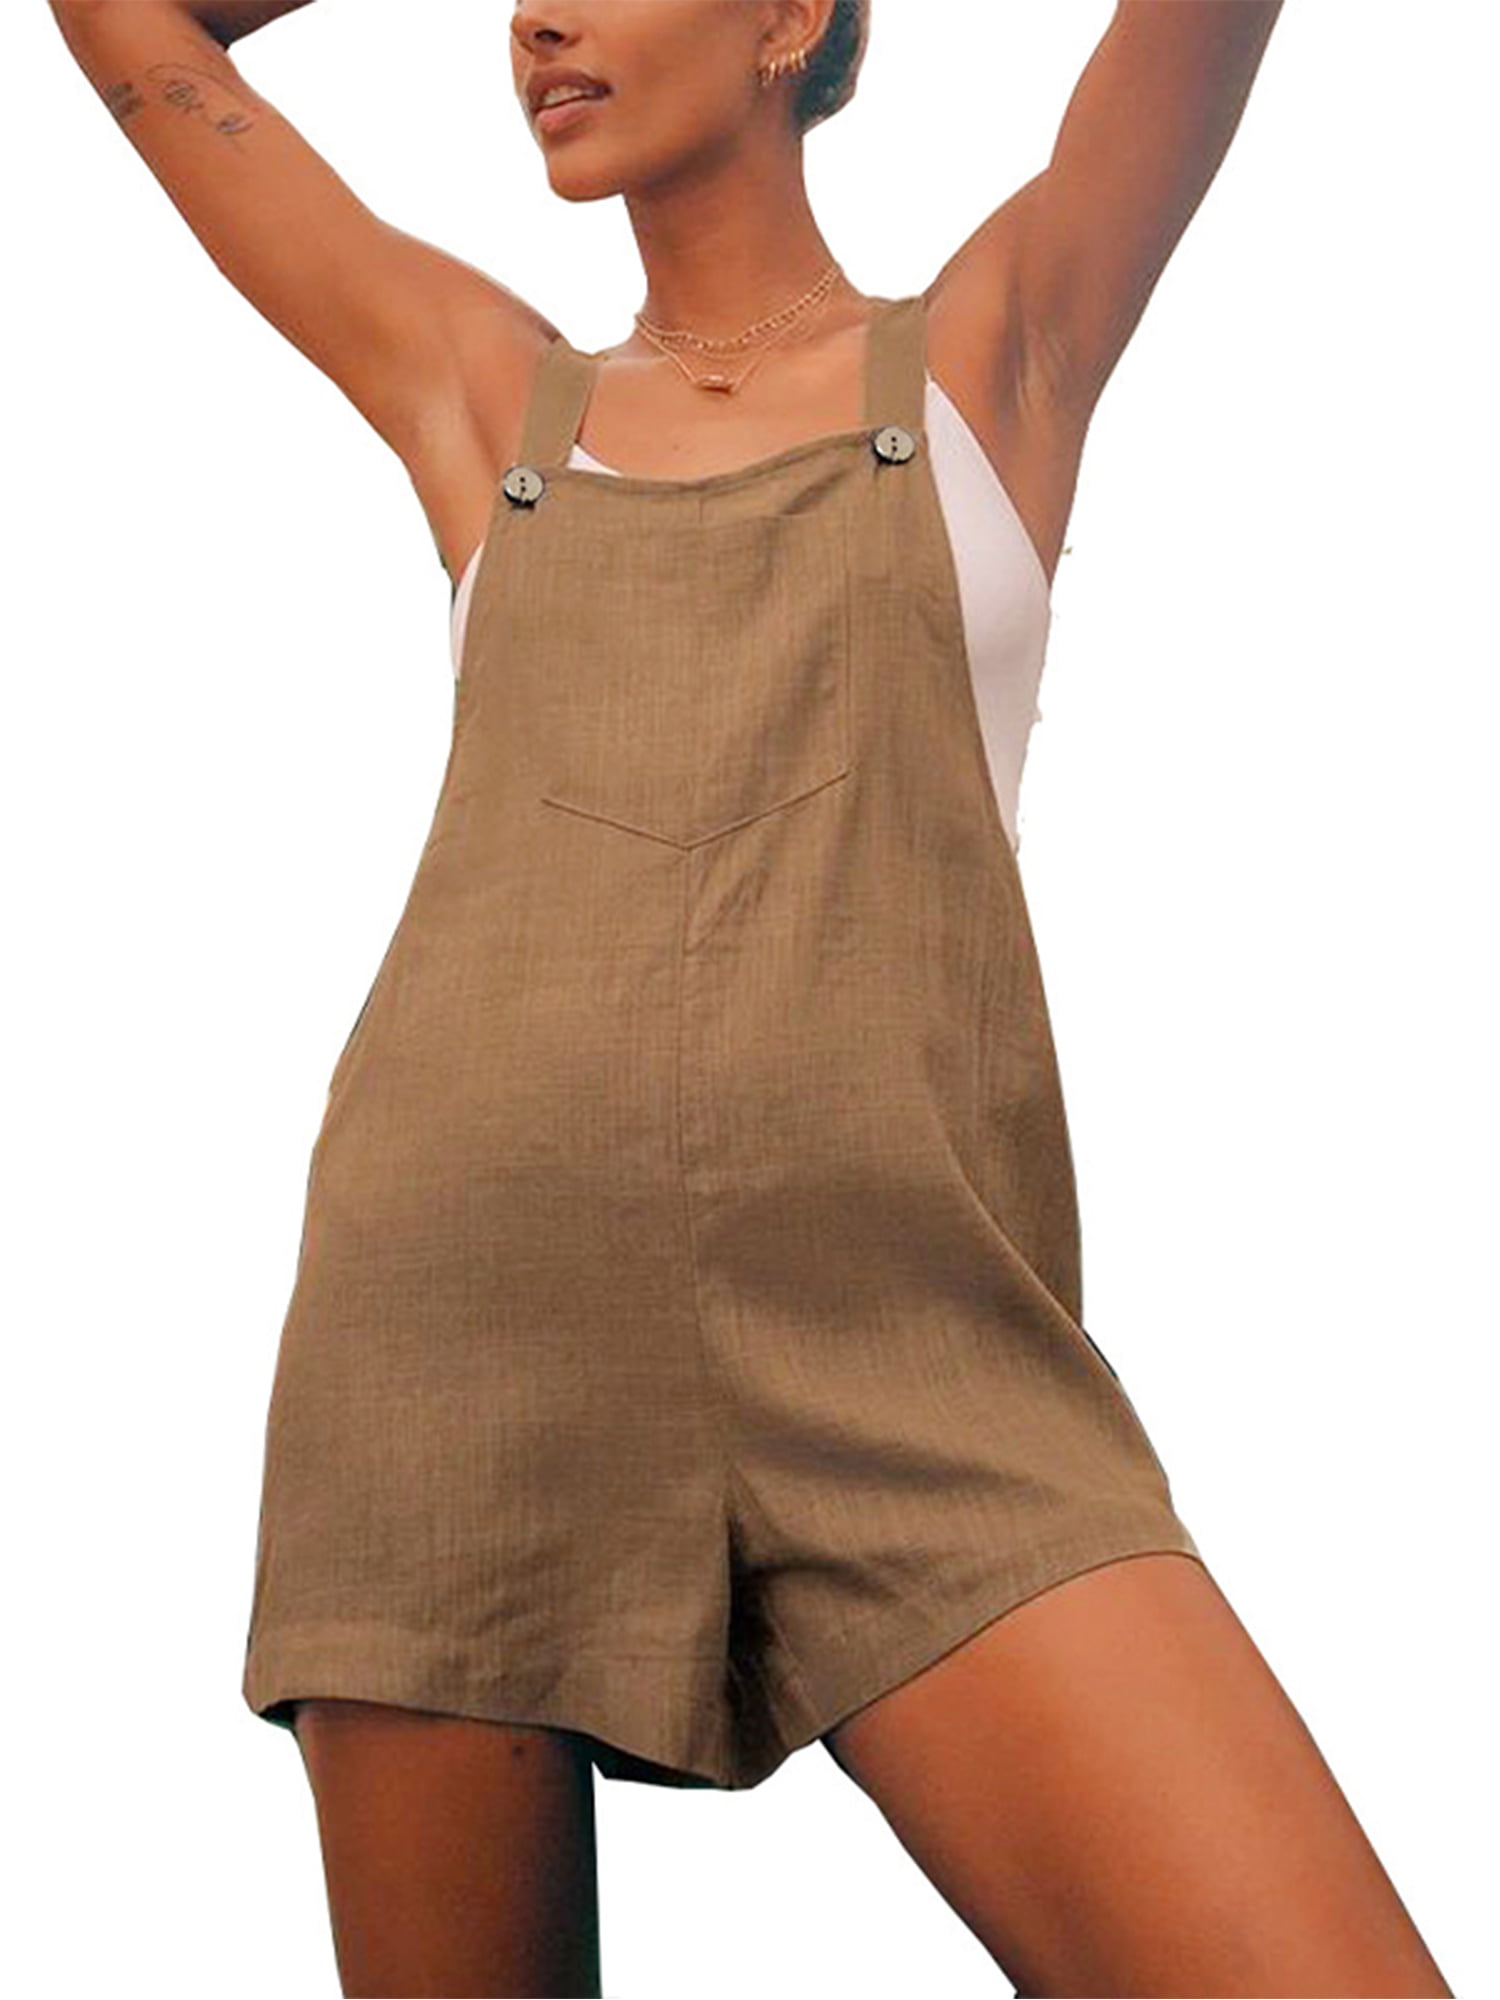 S, Khaki Wawer Women Summer Jumpsuits Causal Elastic Waist Dungarees Linen Rompers Playsuit with Pockets,Holiday Ladies Girls Solid Loose Shorts Pants Clubwear Jumpsuits 